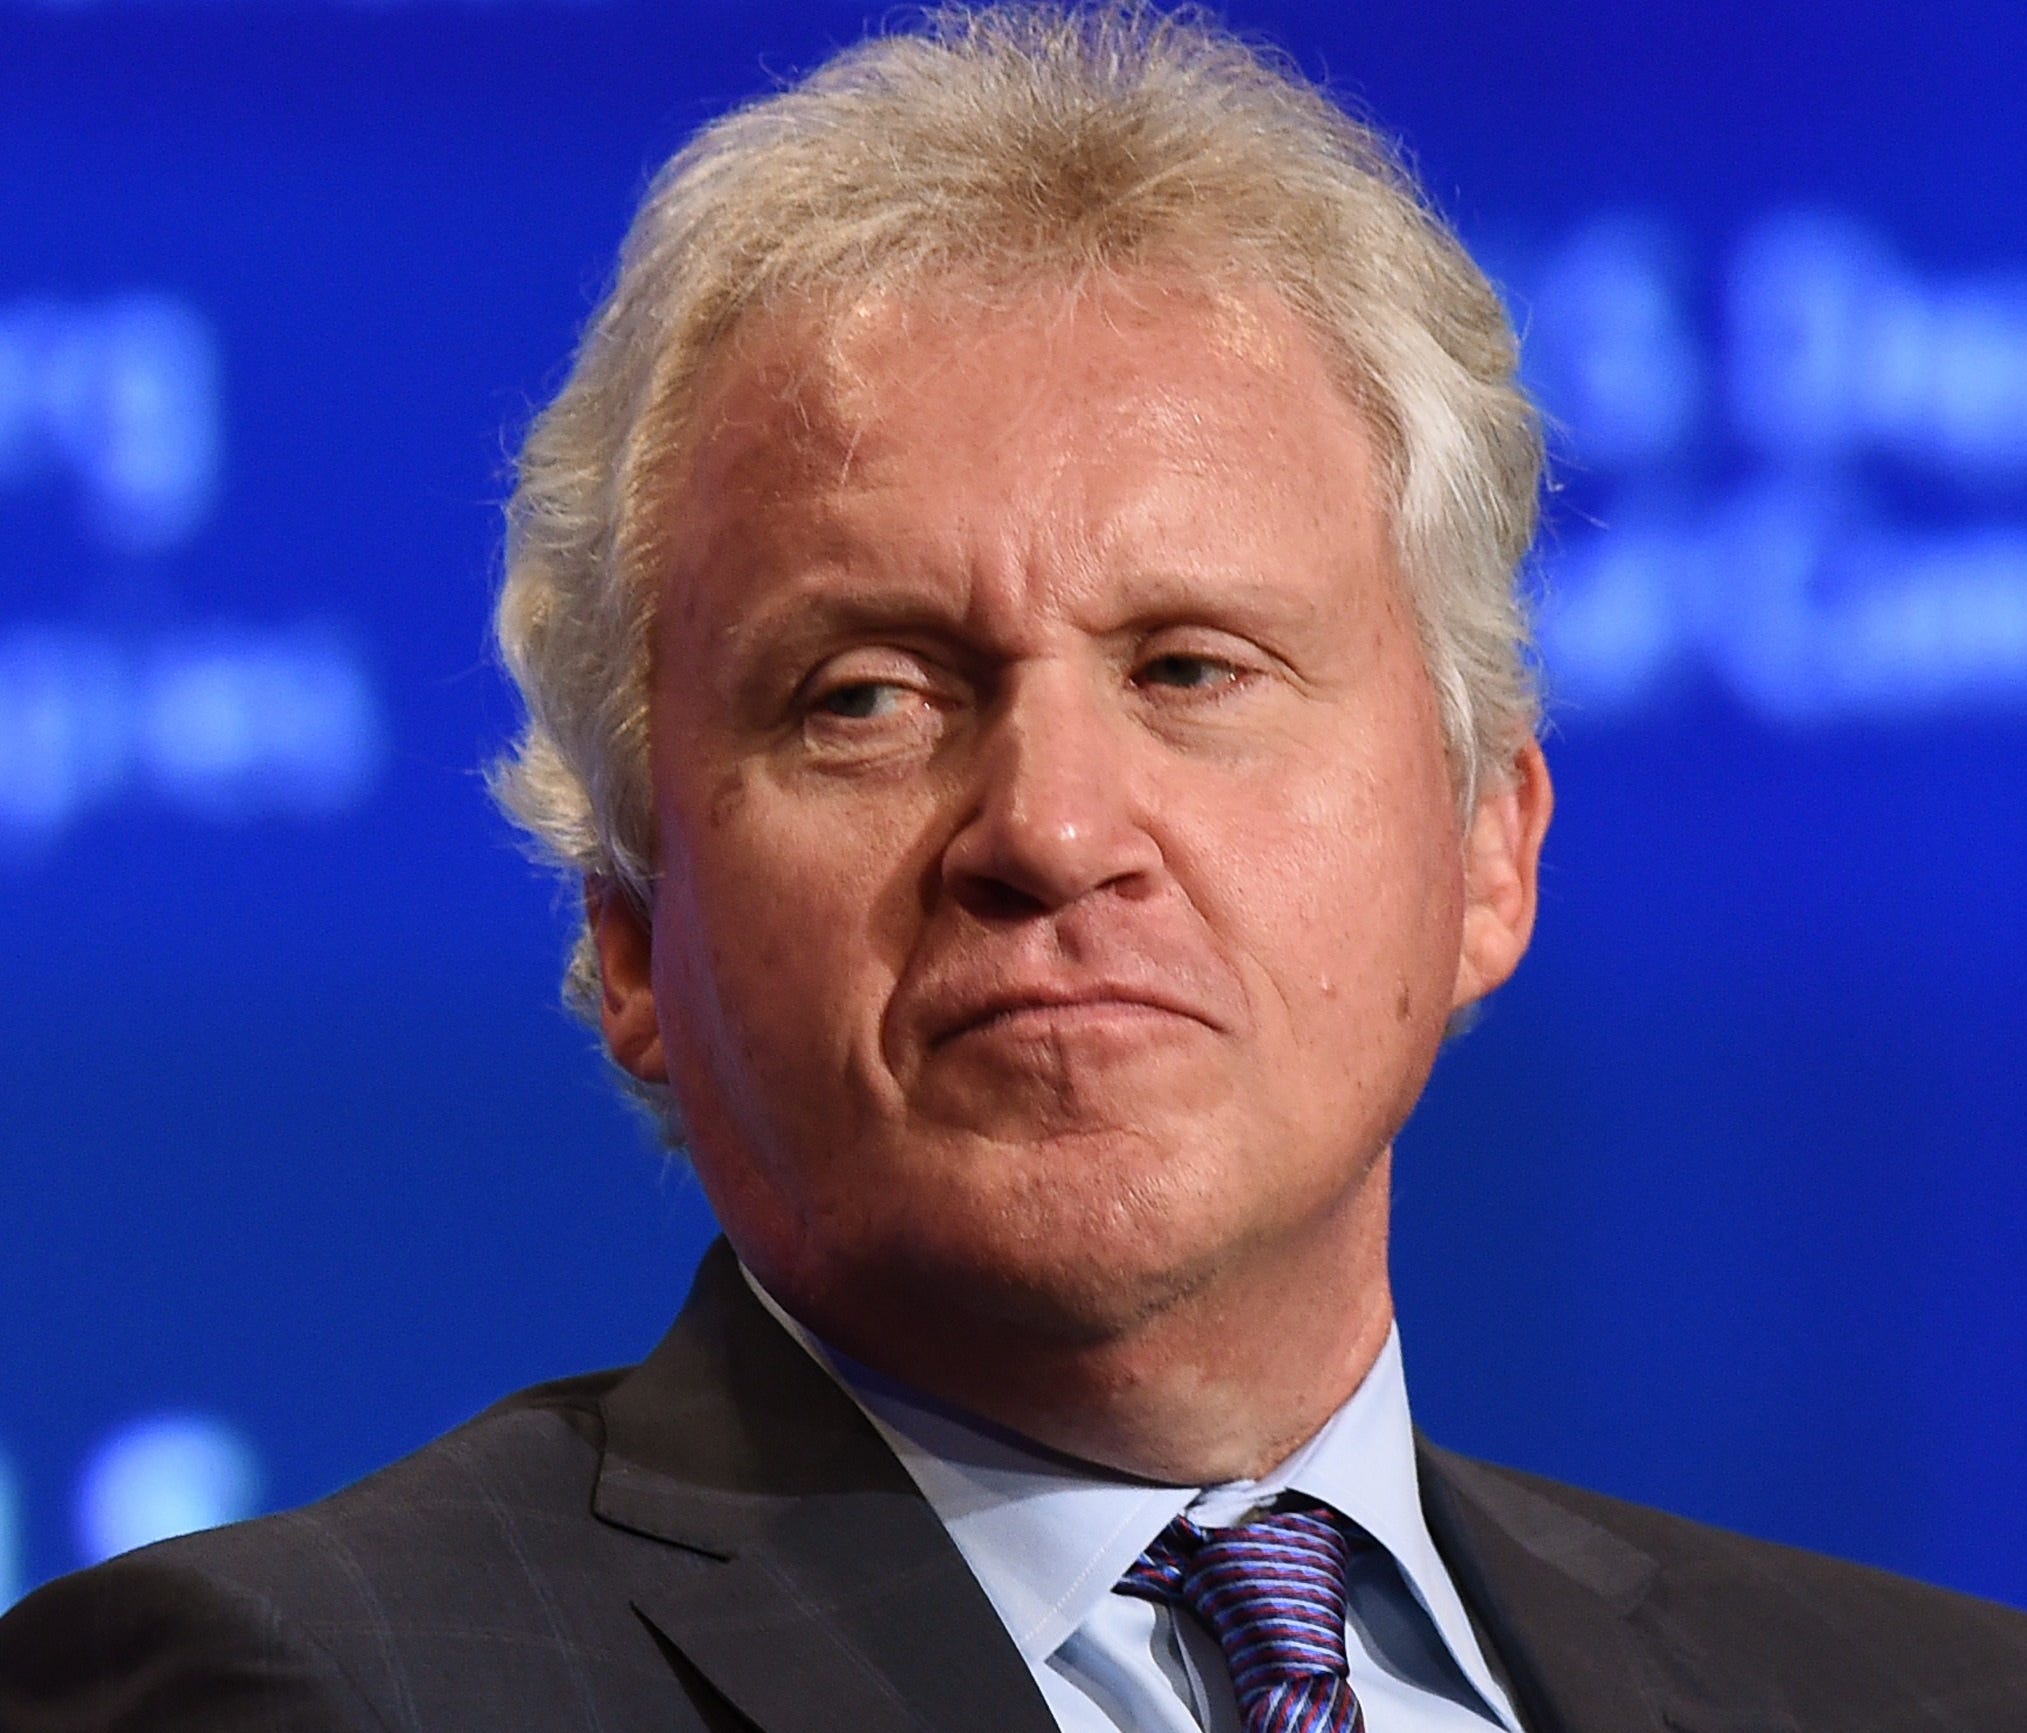 This August 5, 2014 file photo shows then General Electric CEO Jeff Immelt. He's said to be in the running to lead Uber.